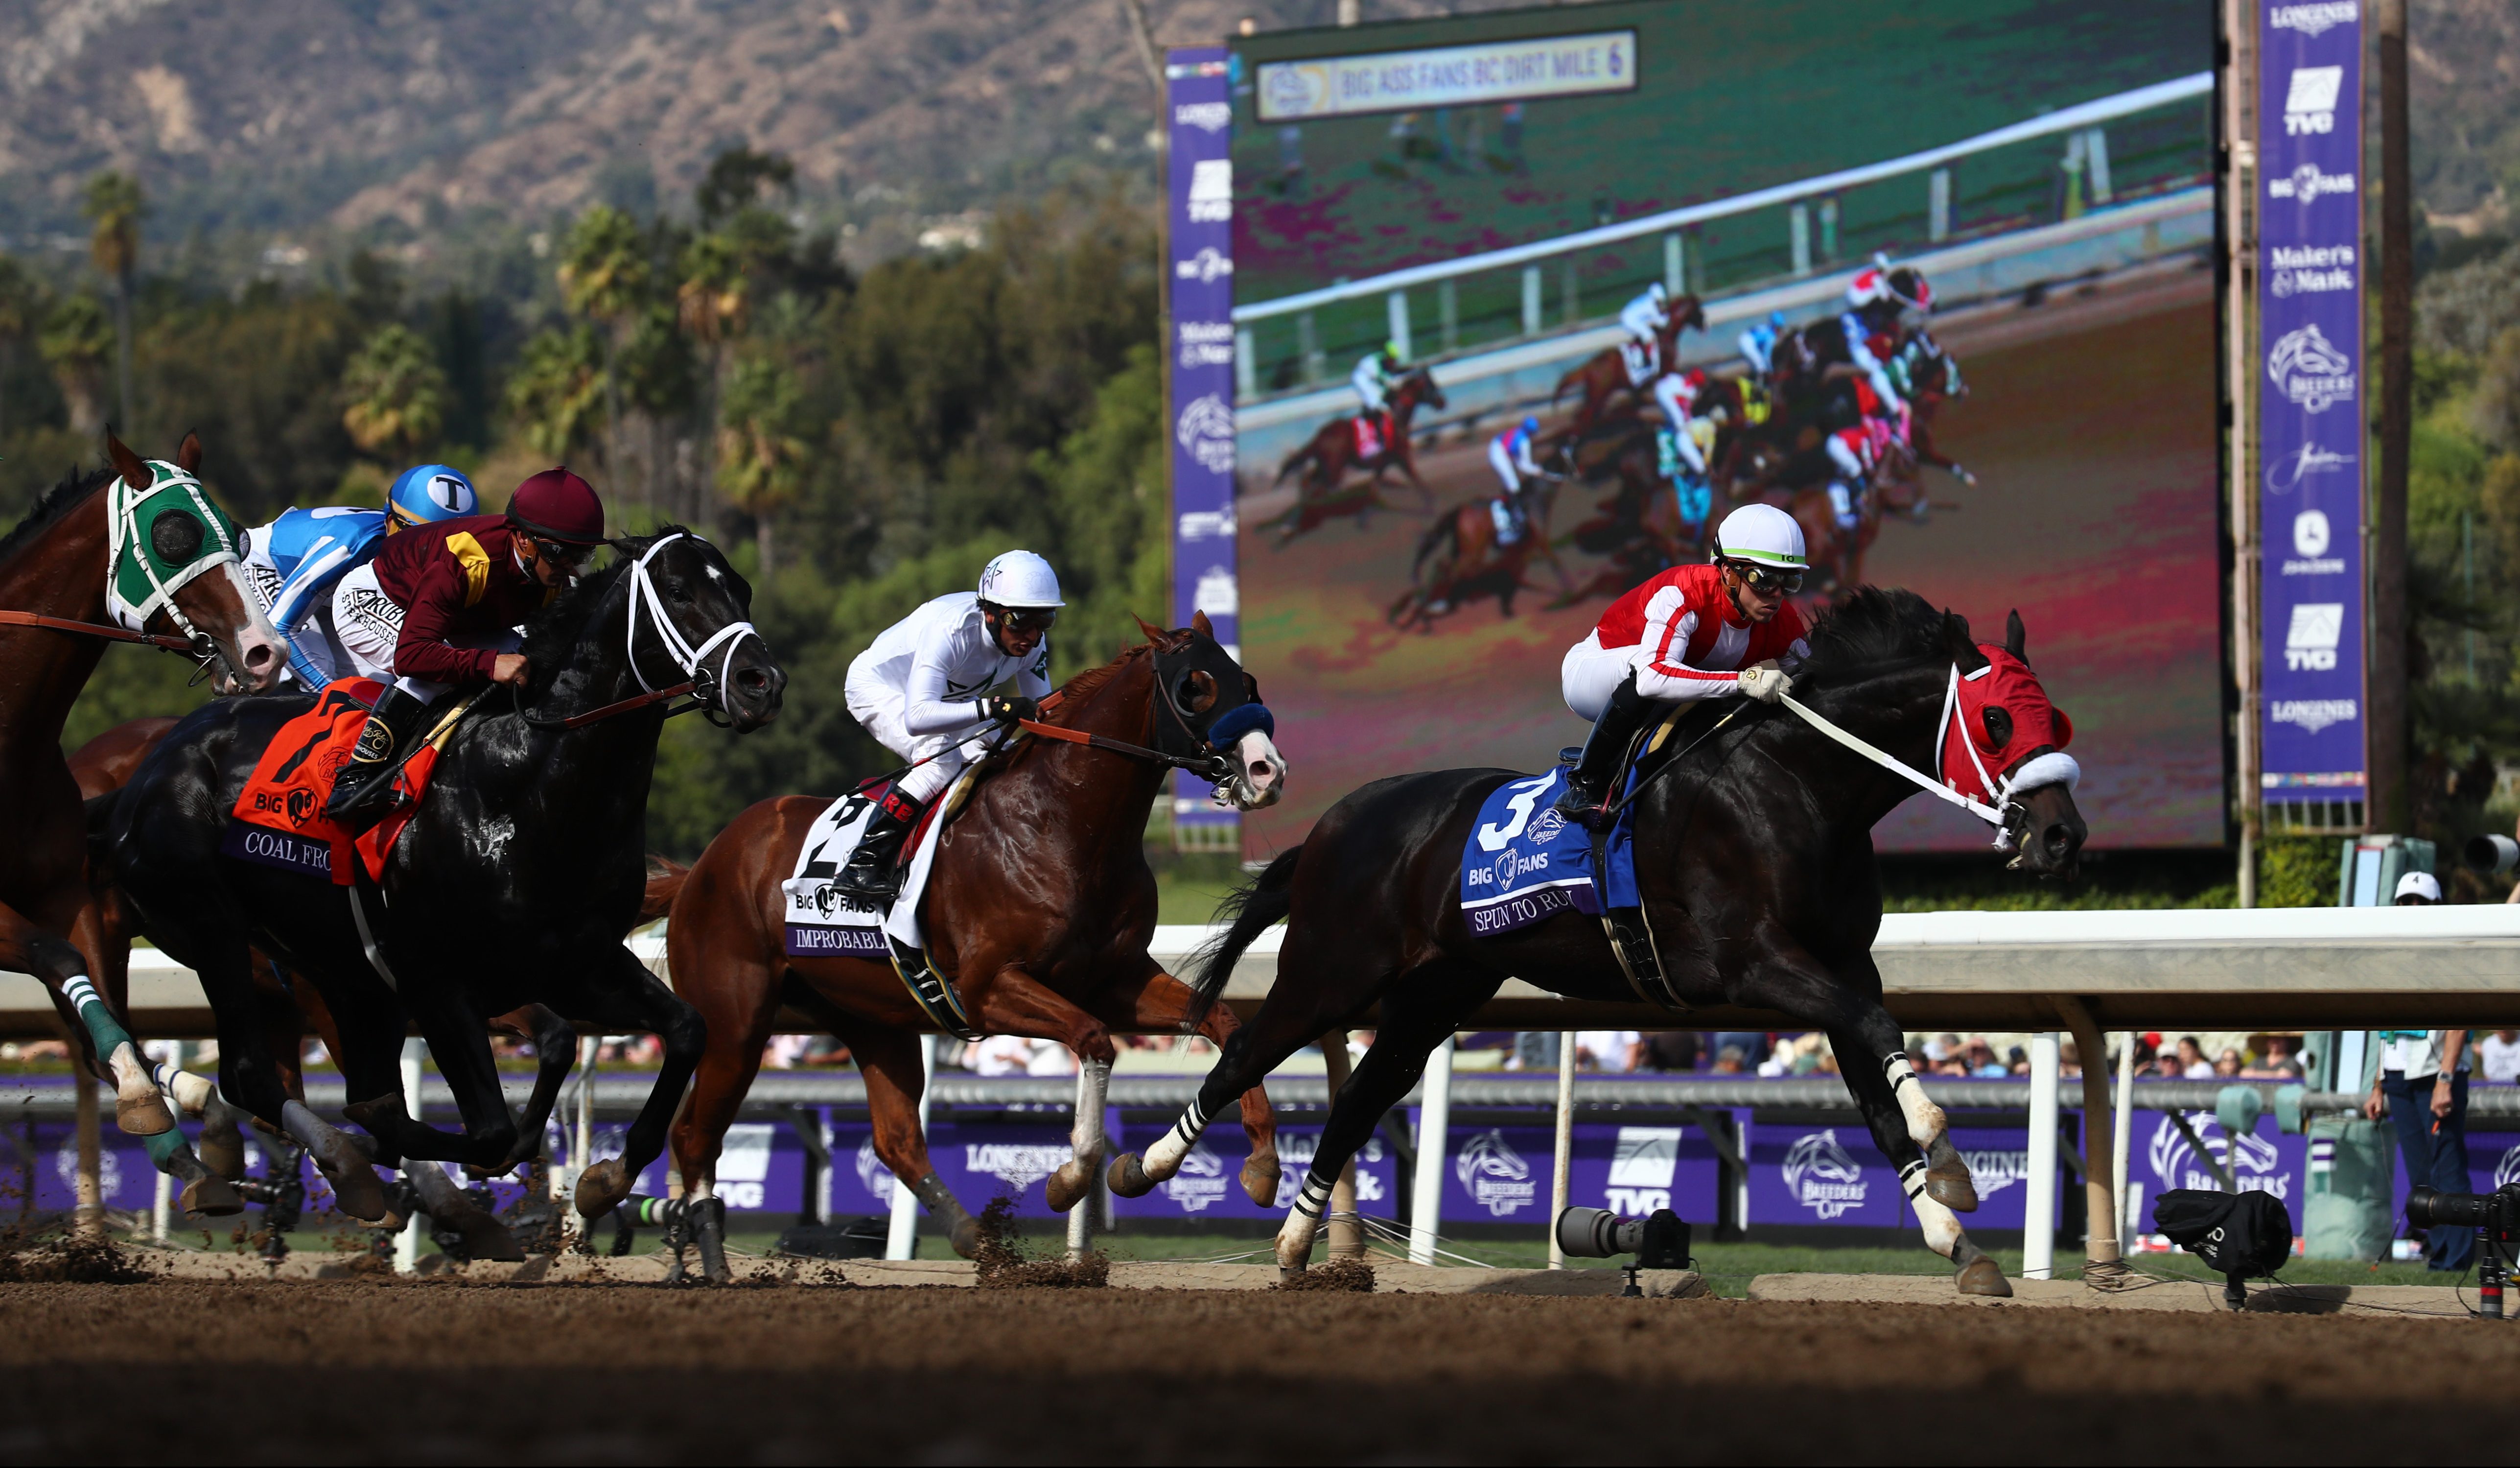 breeders-cup-at-keeneland-sets-friday-attendance-record-of-44-947